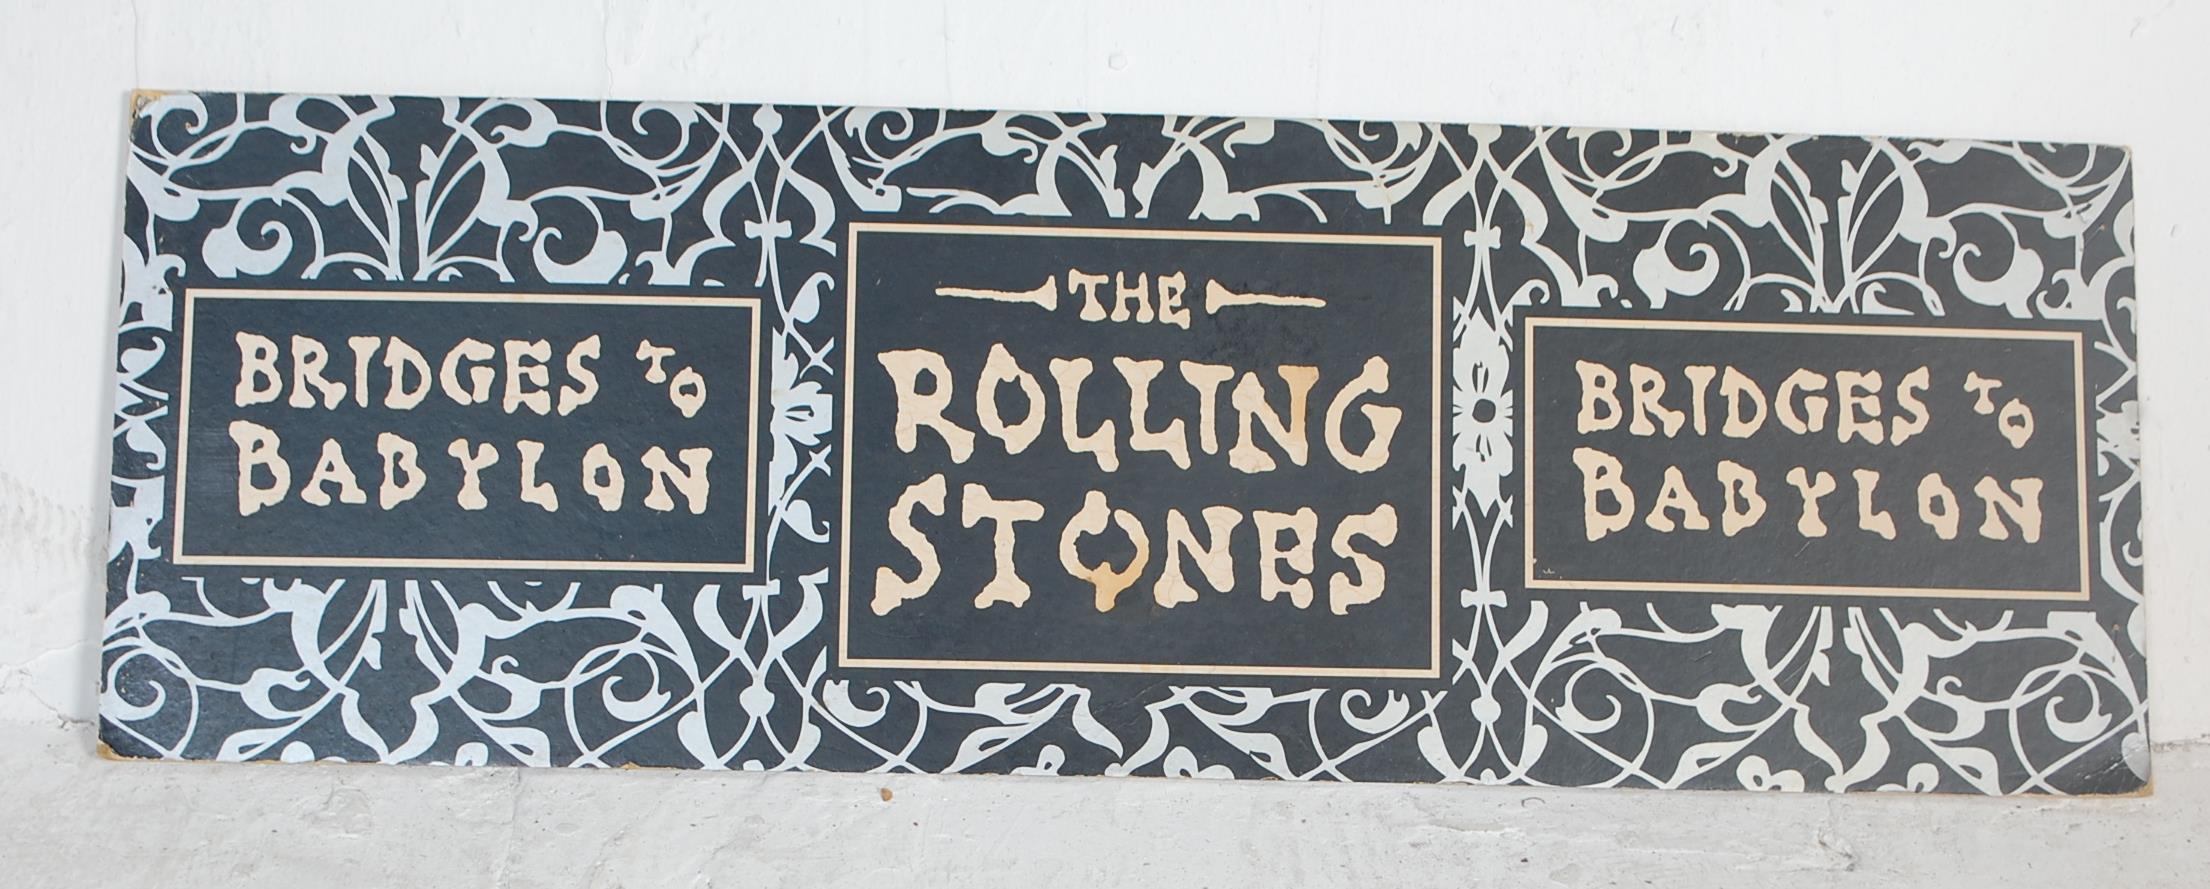 THE ROLLING STONES - ORIGINAL IN-STORE DISPLAY SIGNS - Image 5 of 5